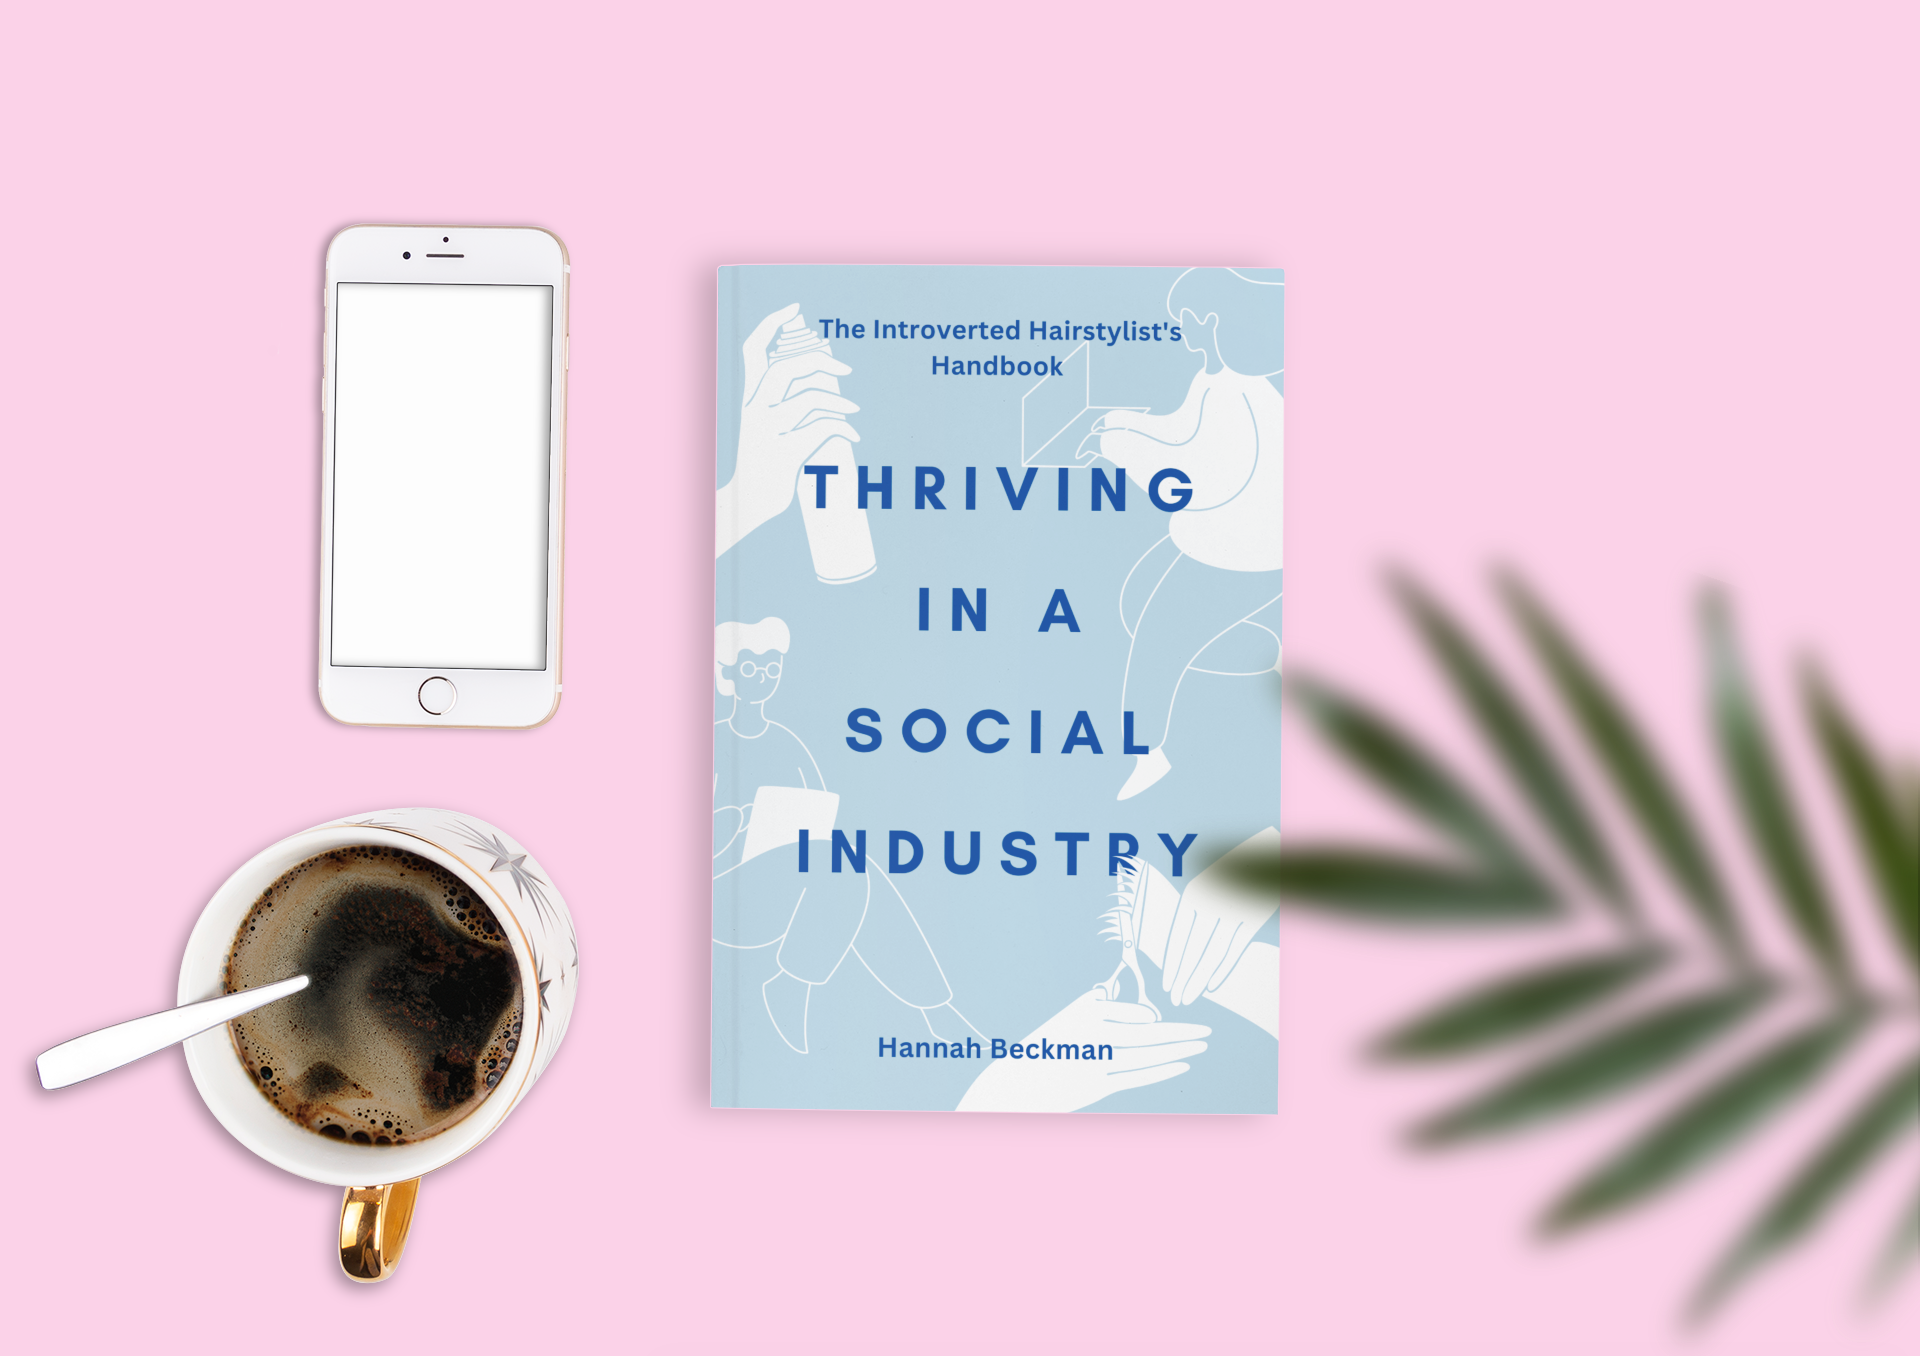 Thriving in a Social Industry: Tips from an Introverted Hairstylist